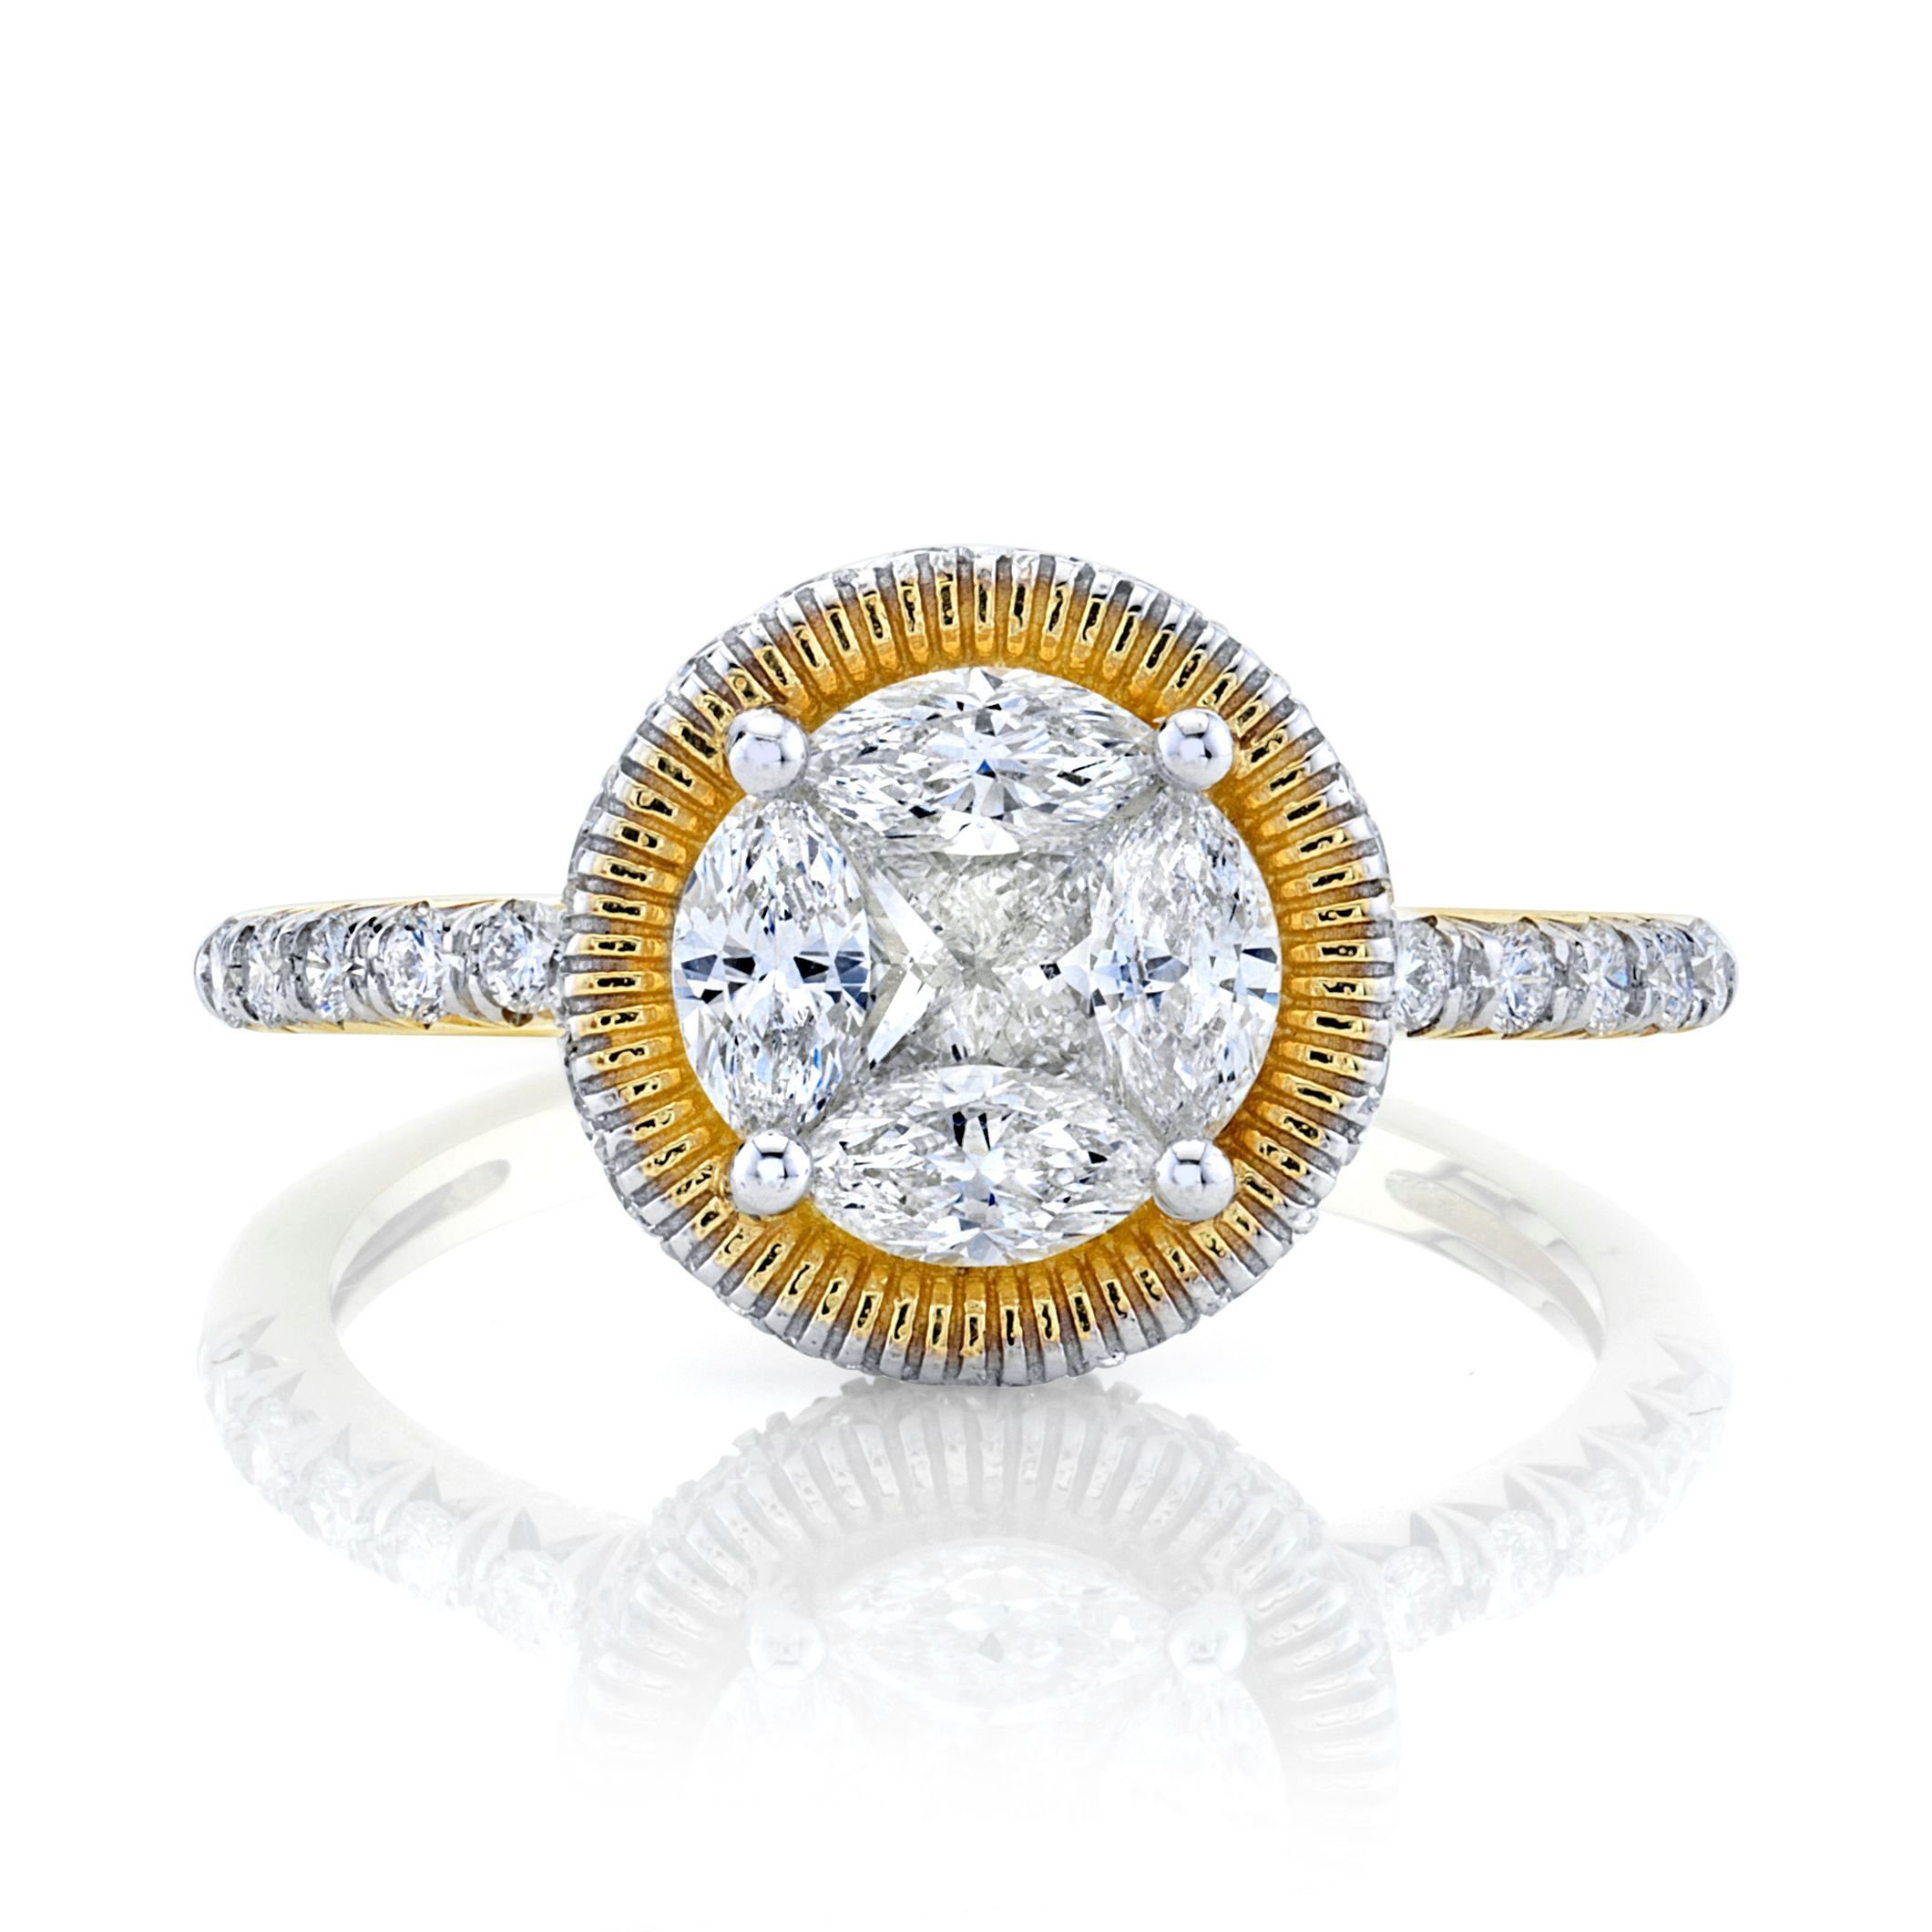 2 CARAT CIPRIANI RING WITH STRIE HALO AND FRENCH PAVE DETAILING